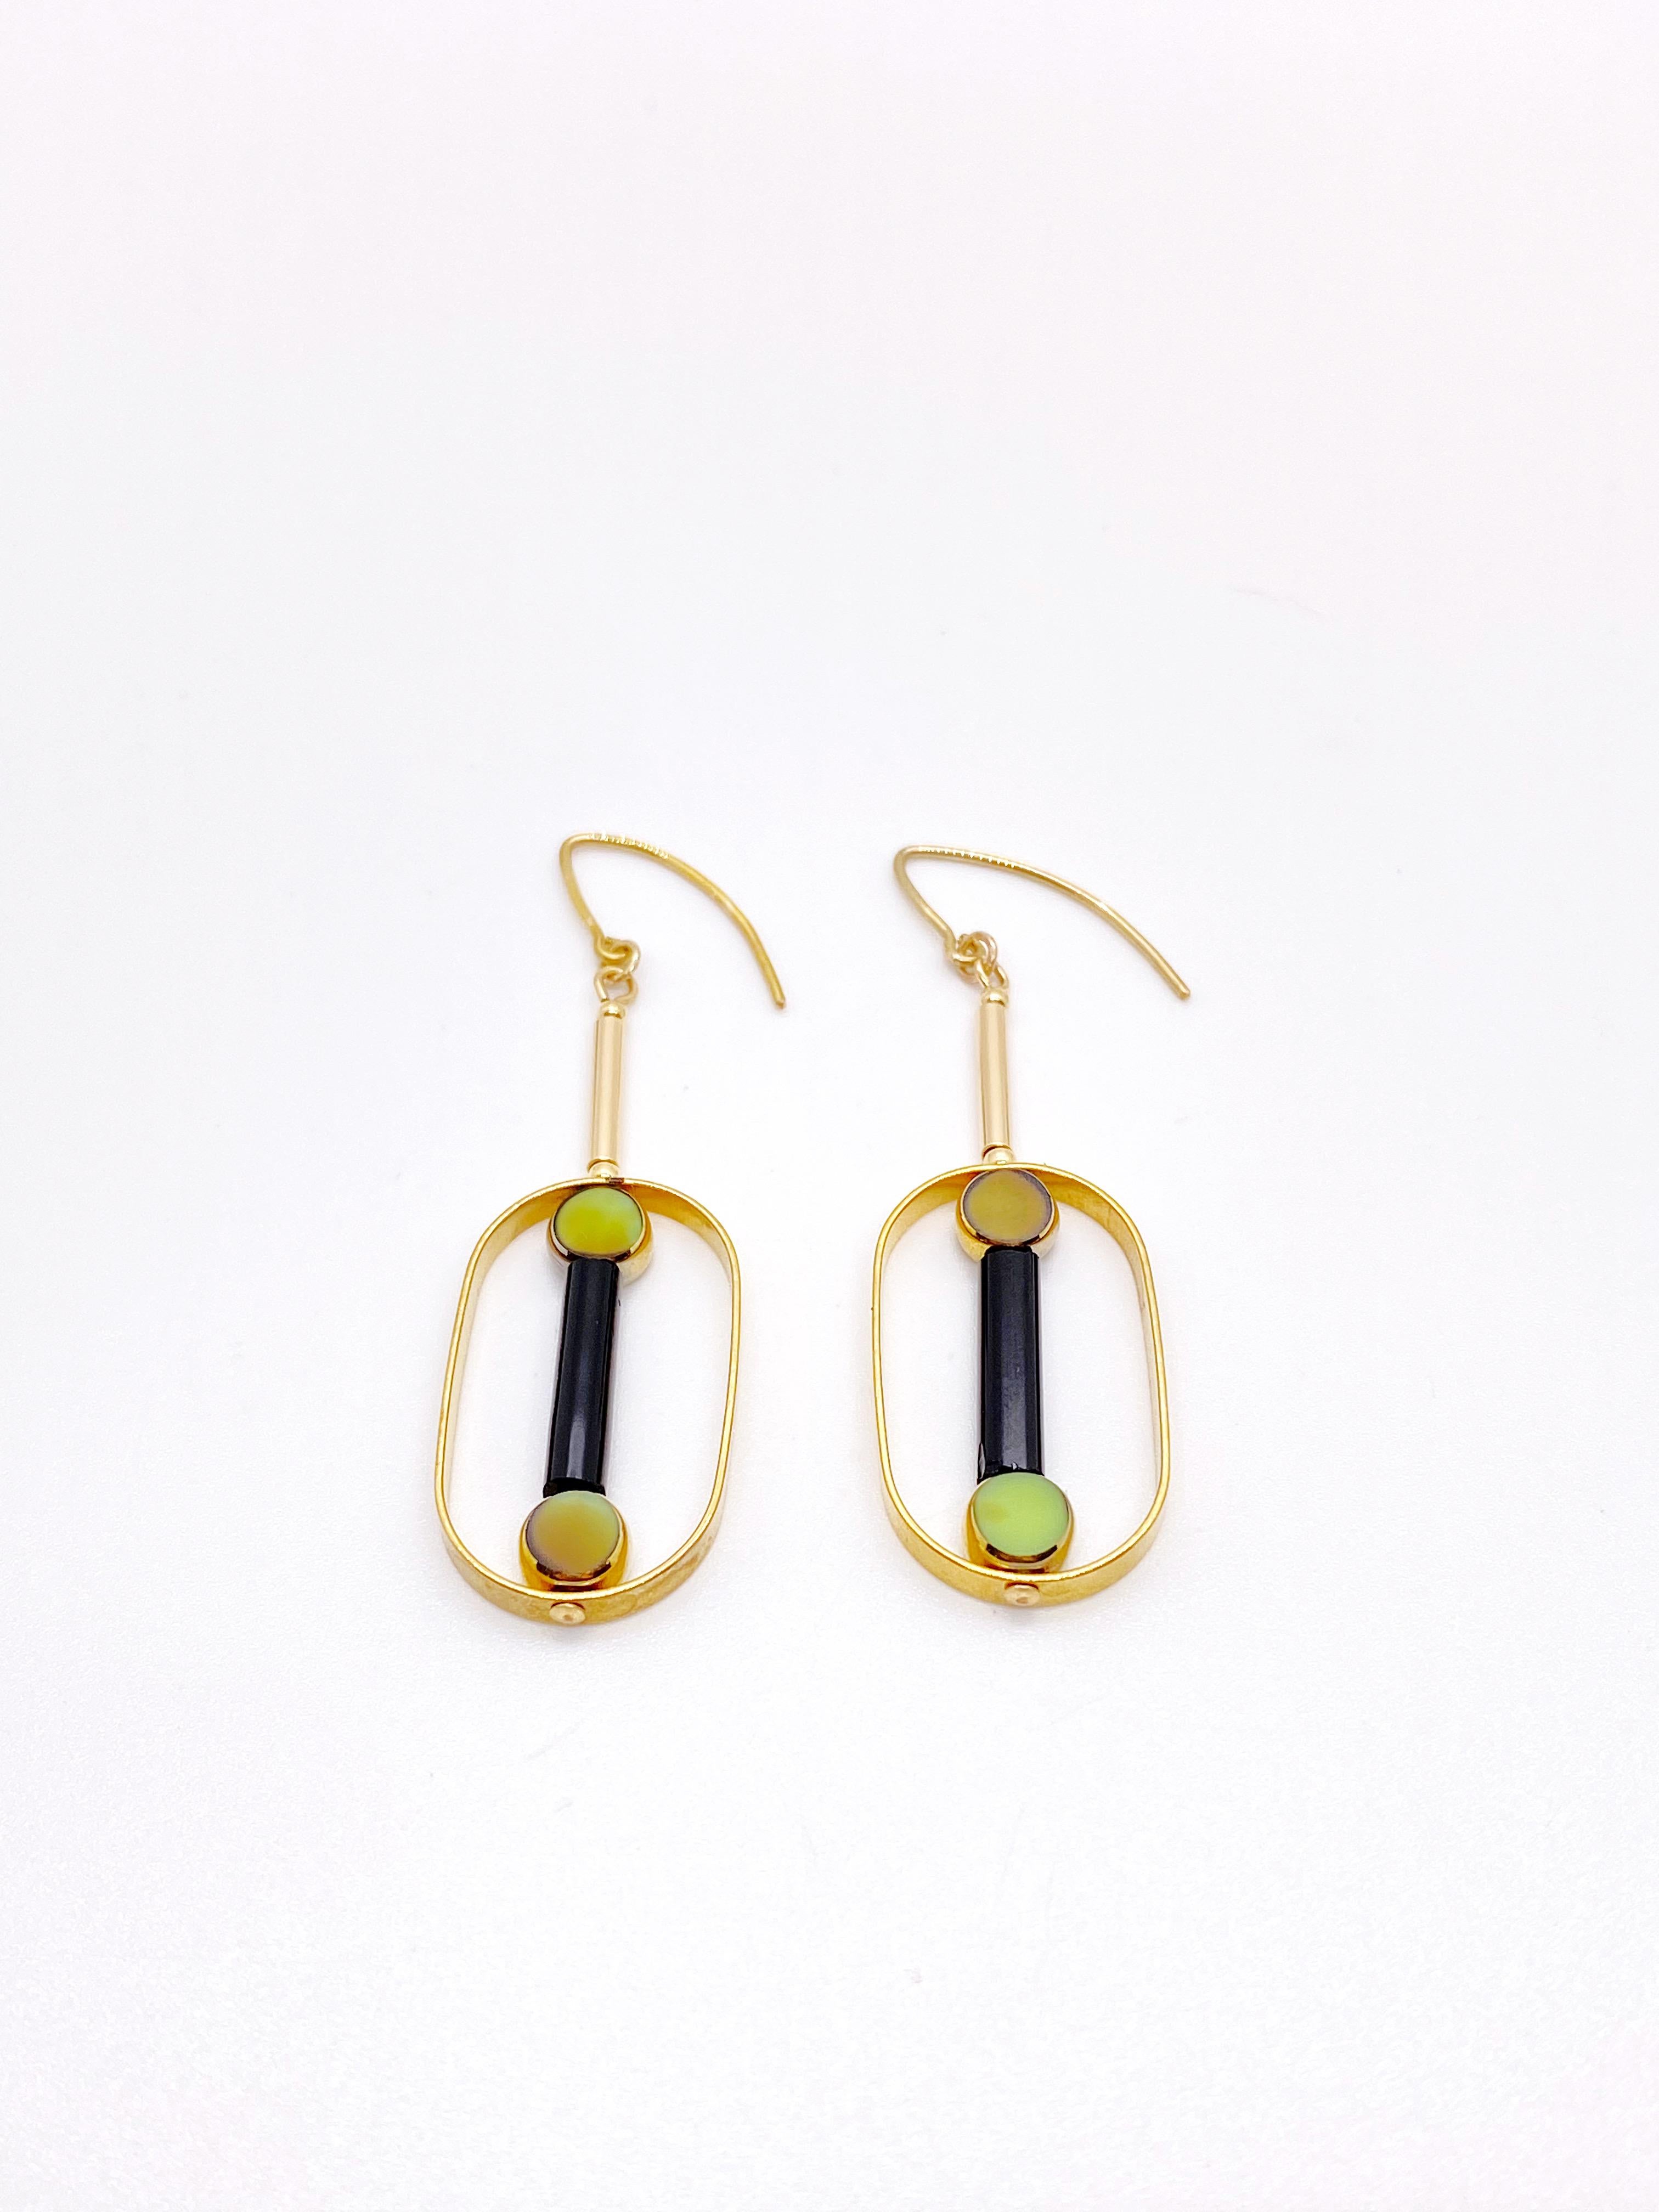 This is for a set of earrings. The earrings consist of 2 mini marbled green circle shaped beads with black glass tube beads. They are new old stock vintage German glass beads that are framed with 24K gold. The beads were hand pressed during the